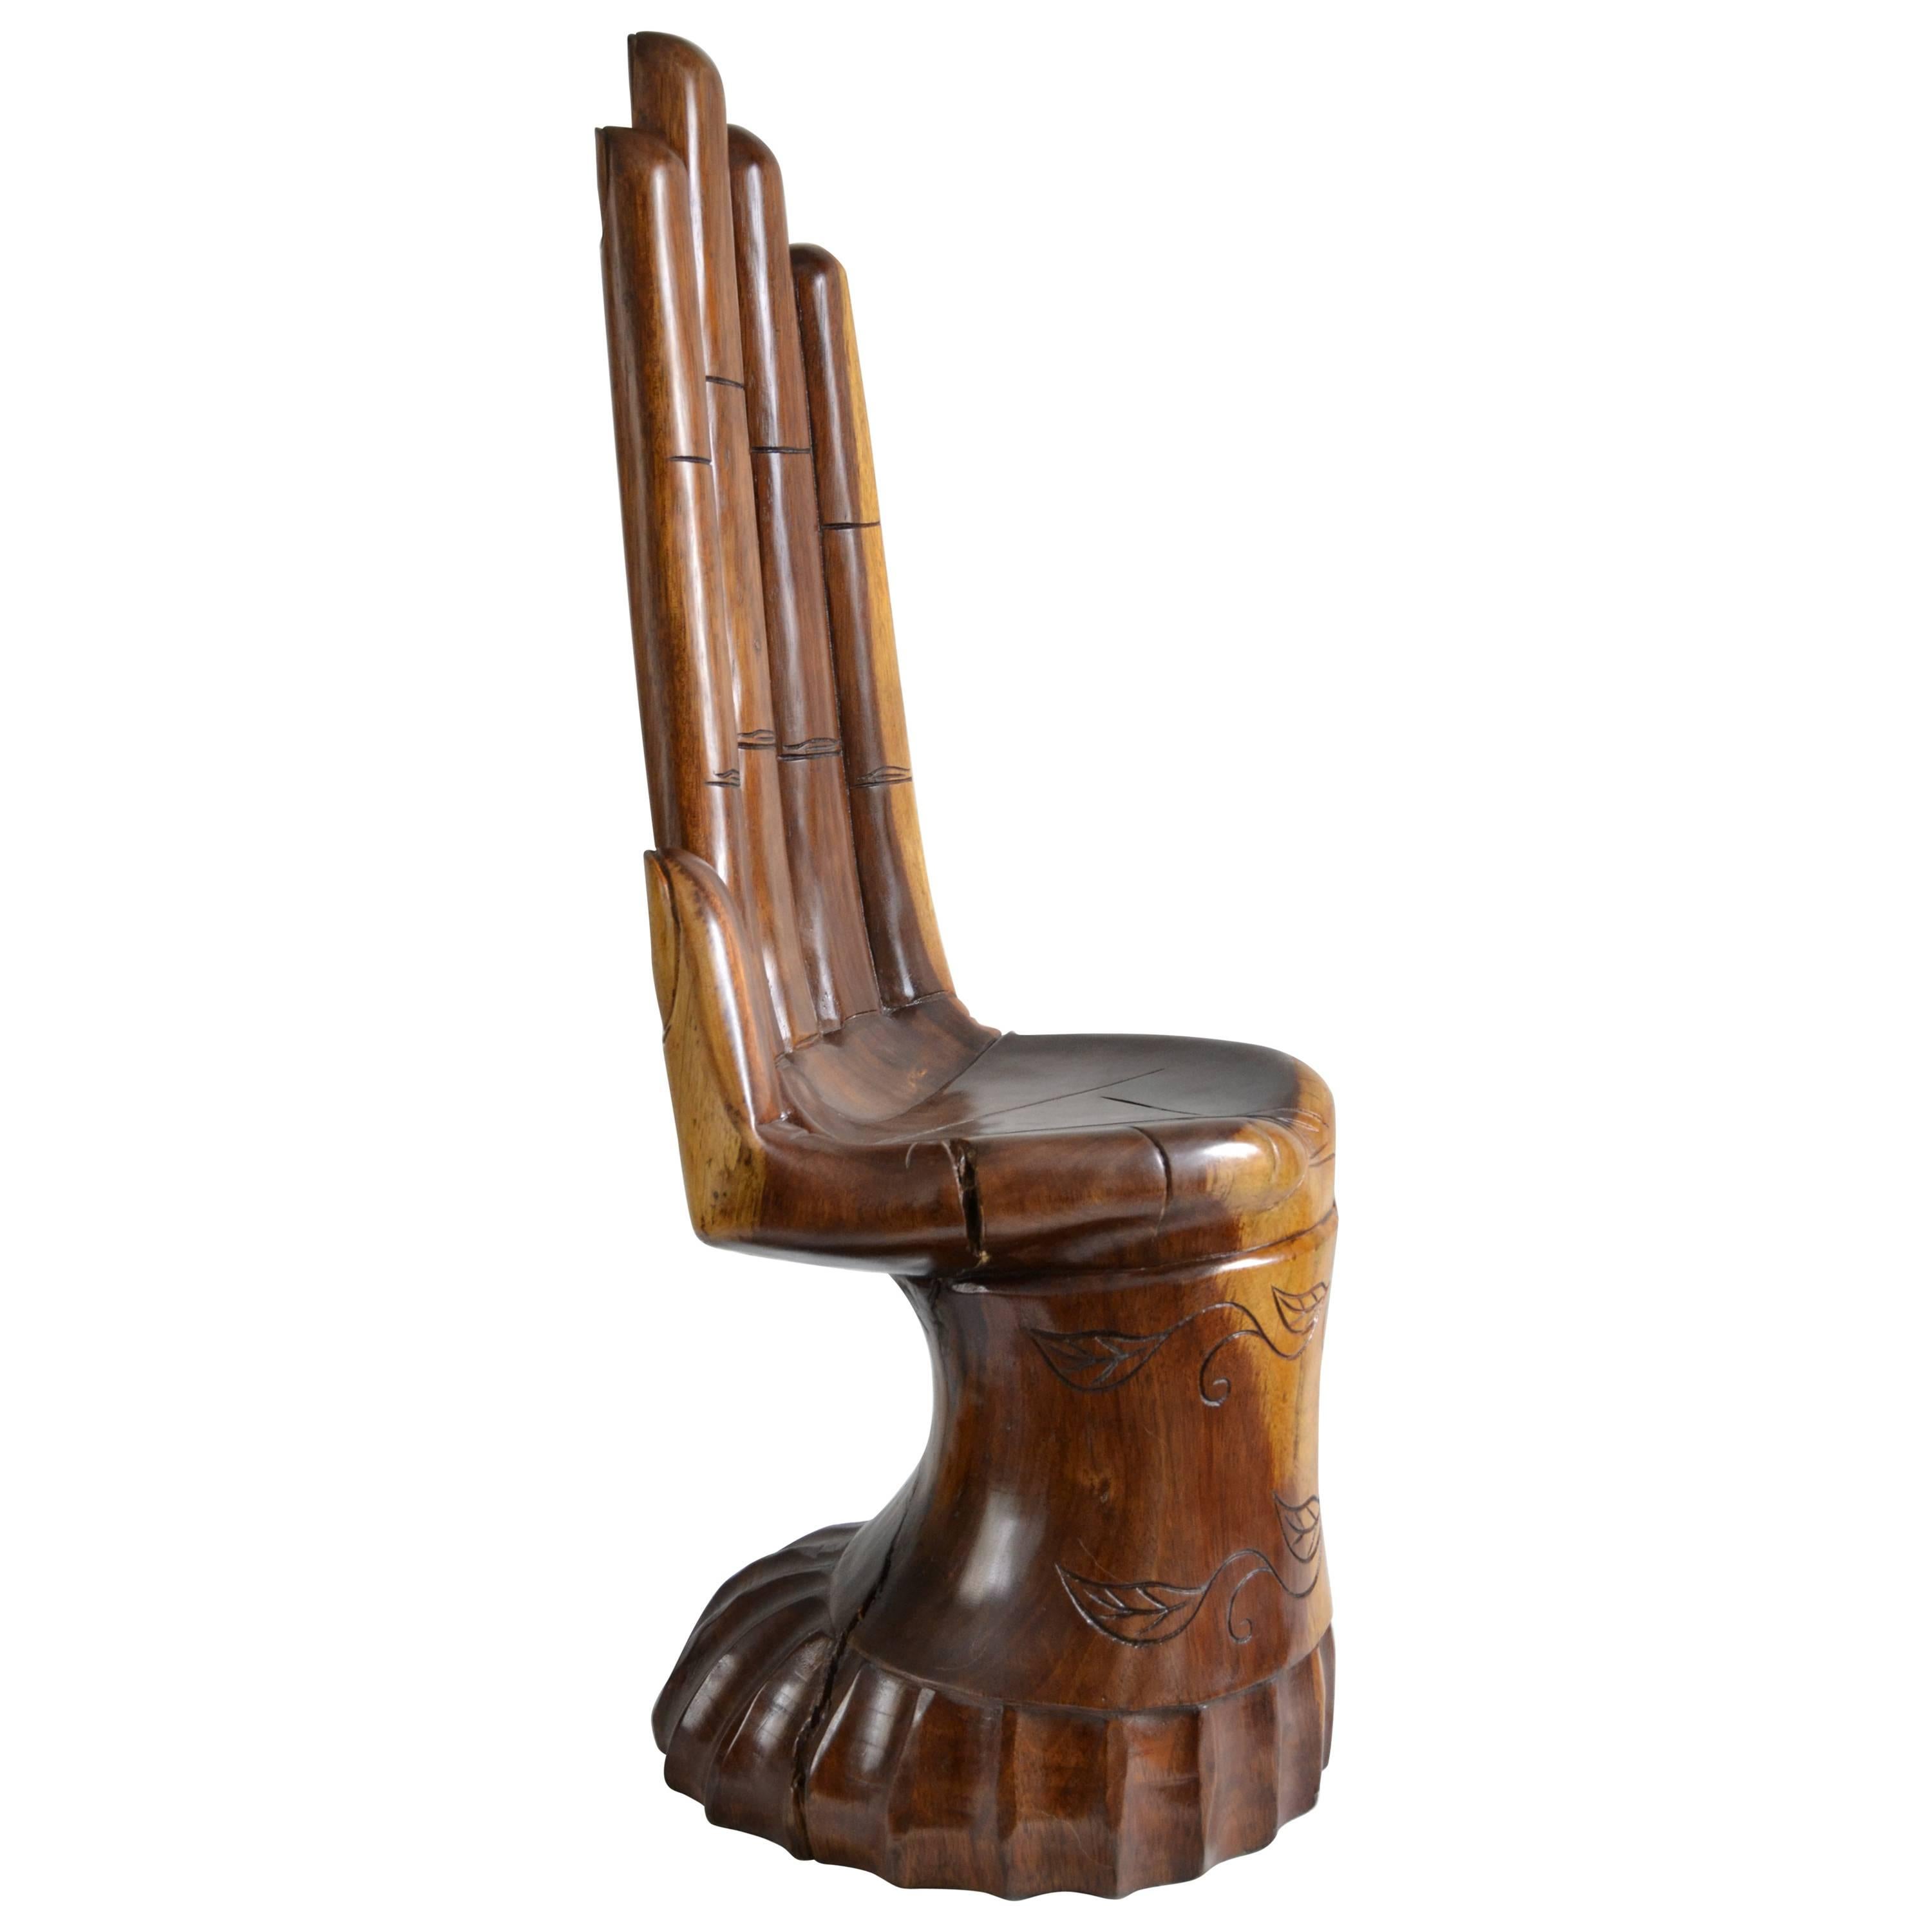 Vintage 1960s Pedro Friedberge Style Wood Hand Chair For Sale at 1stDibs